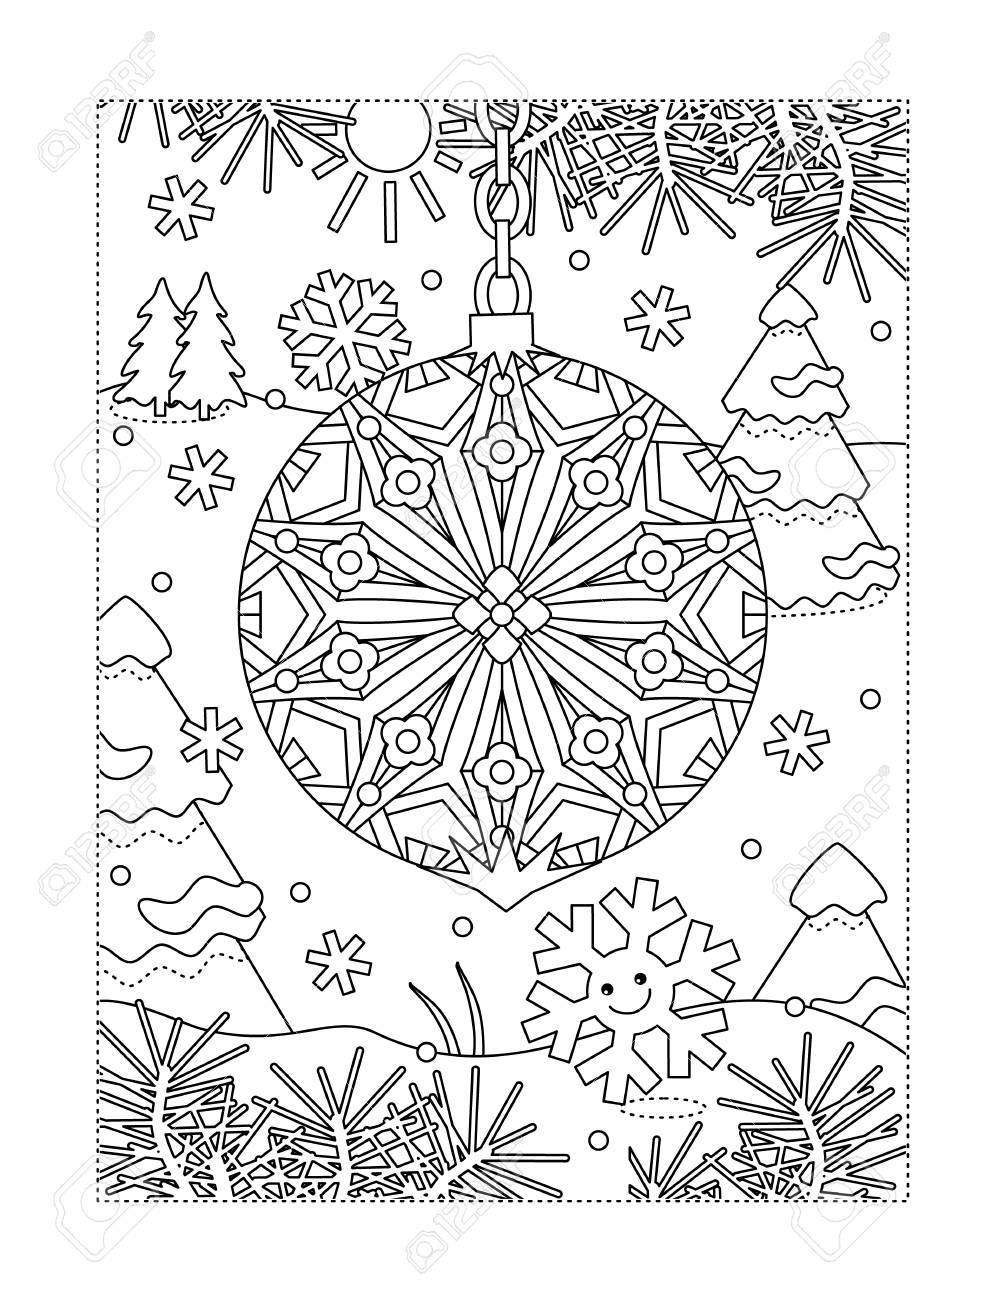 Winter holidays joy themed coloring page with beautiful christmas ornament and outdoor scene royalty free svg cliparts vectors and stock illustration image